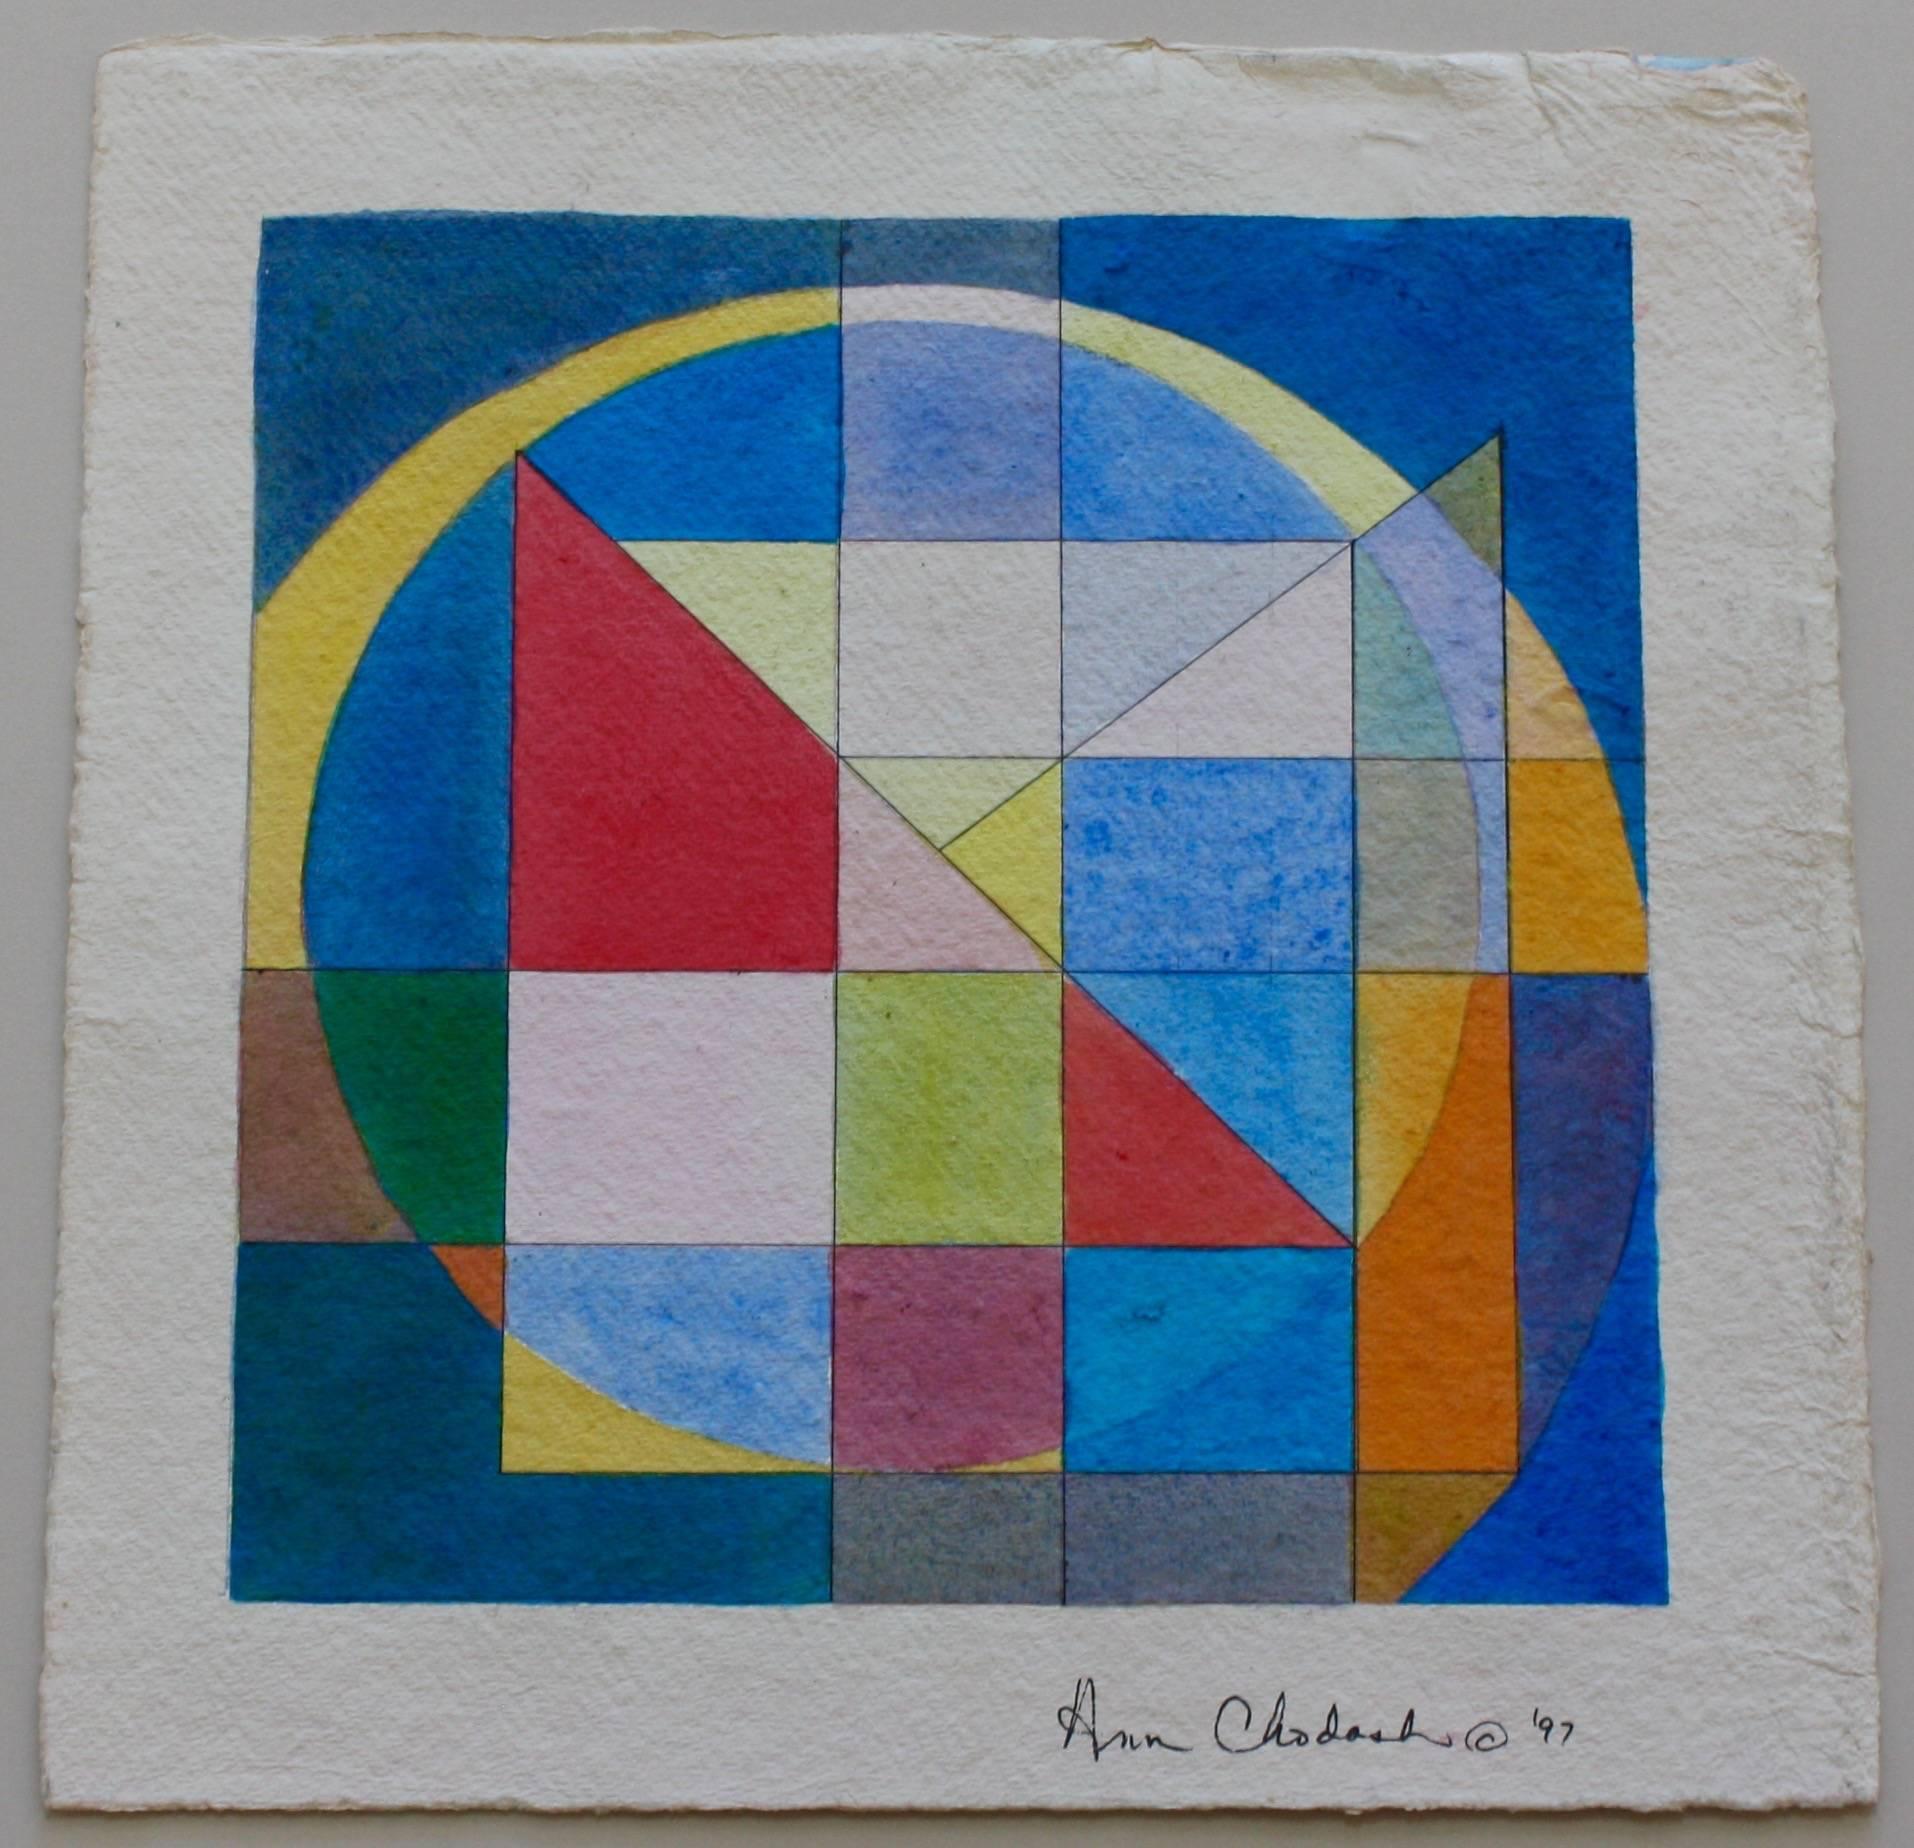 Square with Corners in Blue - Abstract Geometric Art by Ann Chodash